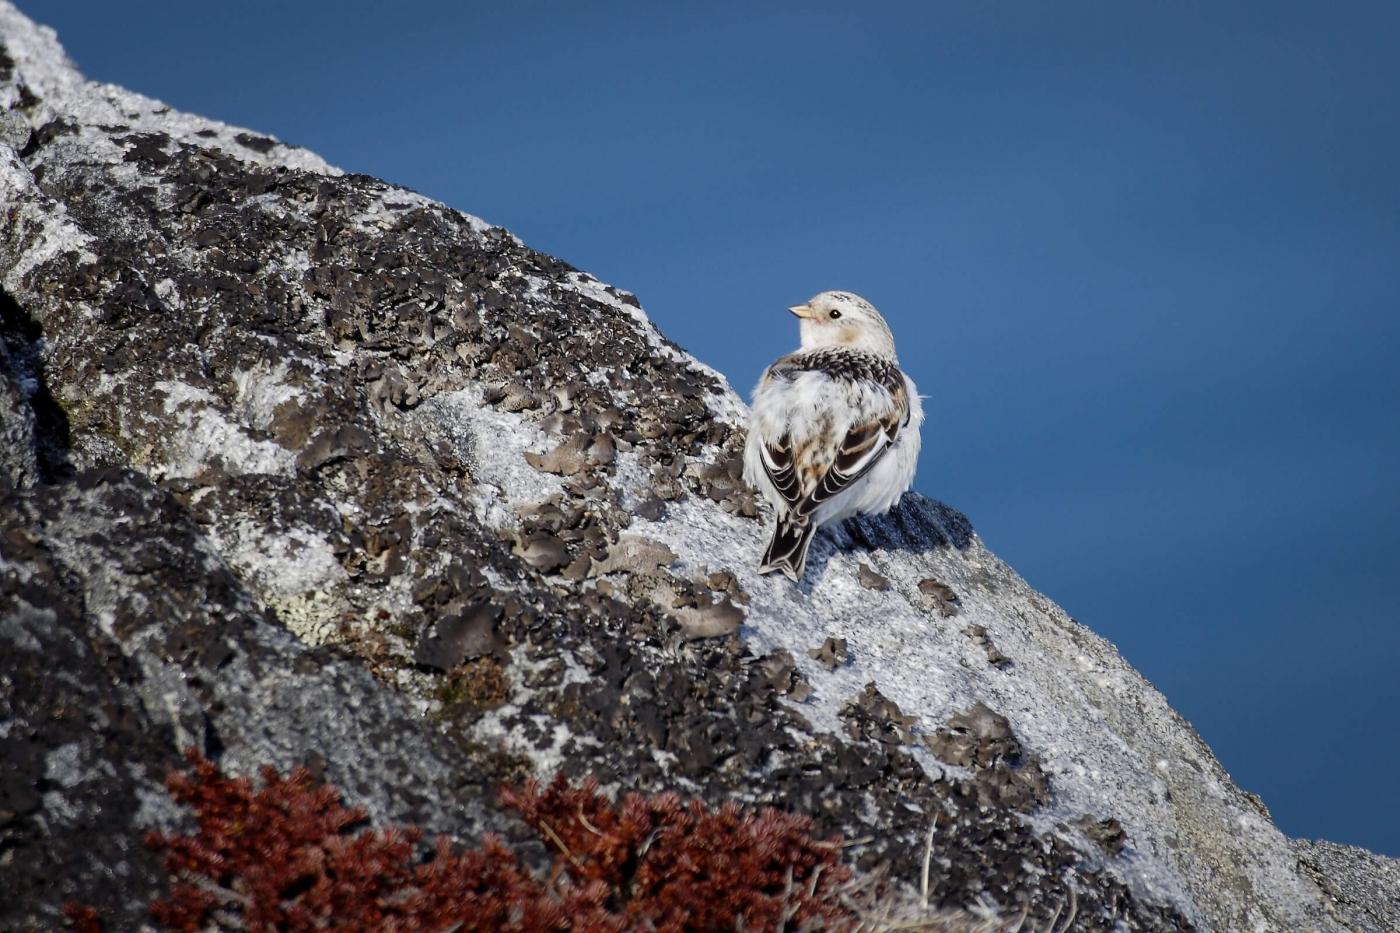 A snow bunting on a cliff in Greenland. Photo by Aqqa Rosing Asvid - Visit Greenland